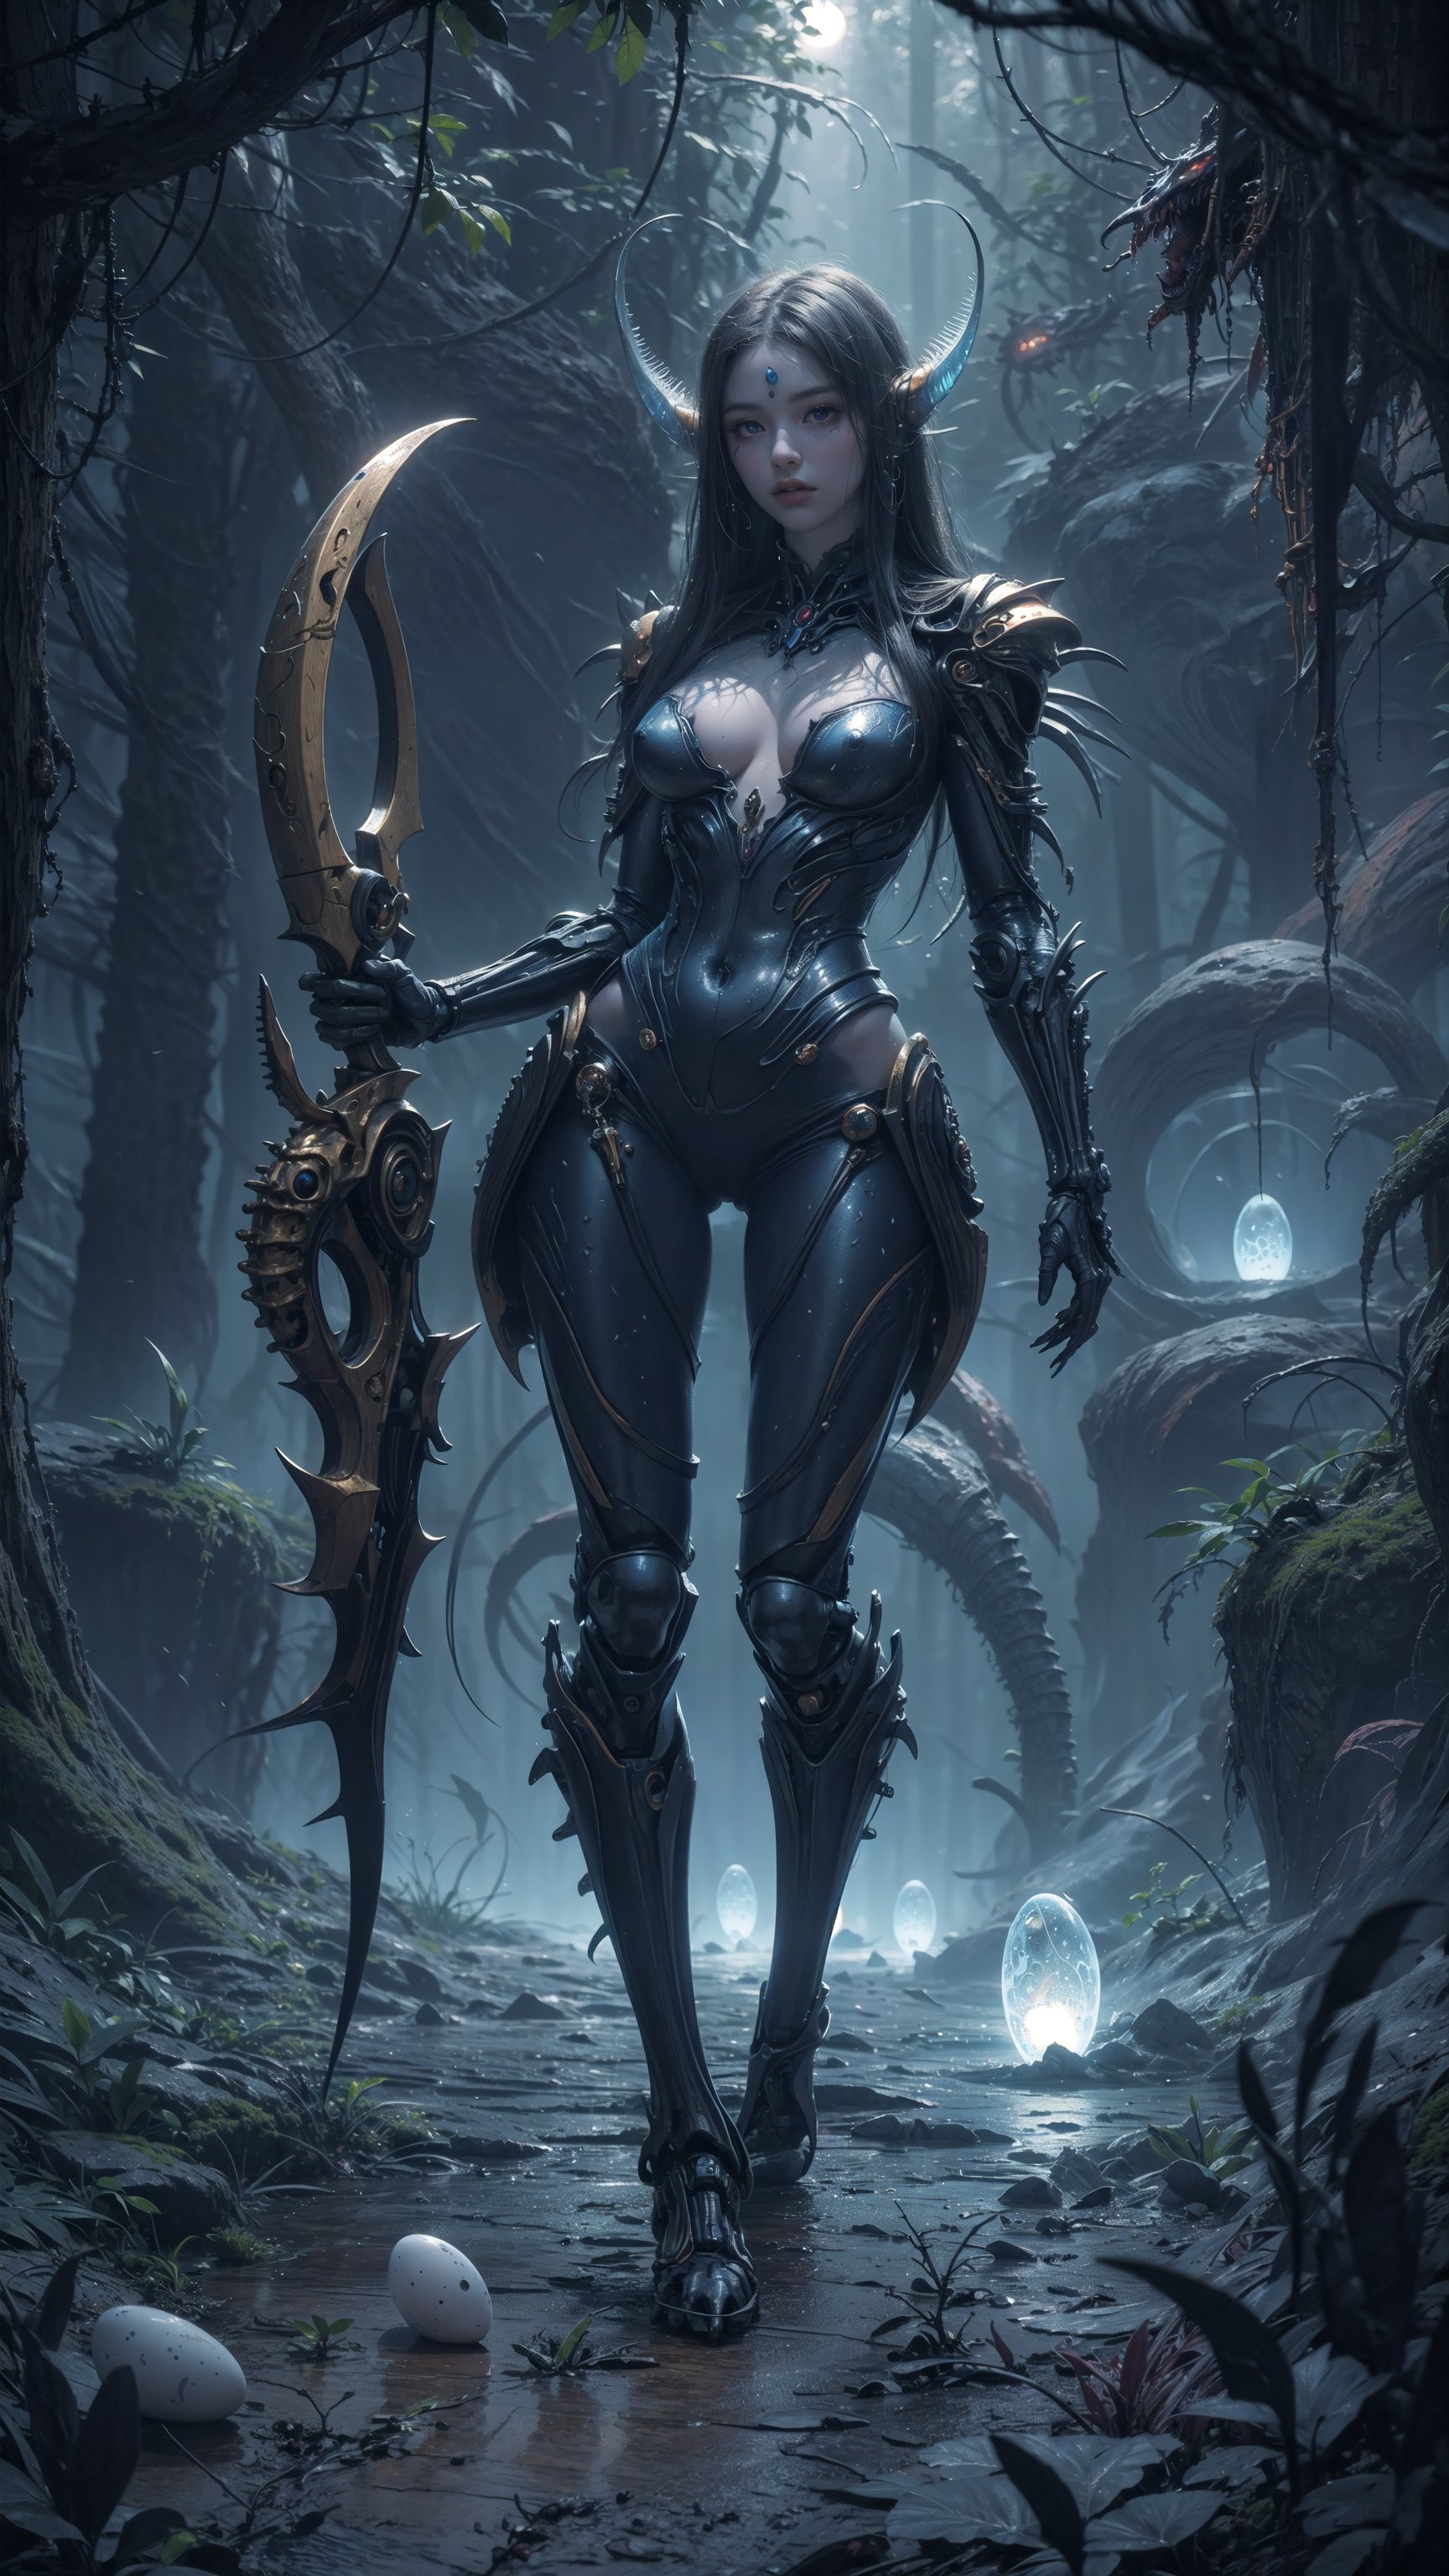 "painting, soft yet detailed, an alien ARCHER GIRL in an ethereal biomechanical landscape, surrounded by semi-translucent alien eggs, muted and mysterious color palette, delicate brush strokes depicting her intricate bio-armor and alien features, soft glow emanating from the eggs, sense of alien royalty and mystique, impressionistic yet detailed portrayal, harmonious and otherworldly atmosphere" full body,cosmiclandscapes,alien landscape,More Detail, alien plants, mysterious,retro